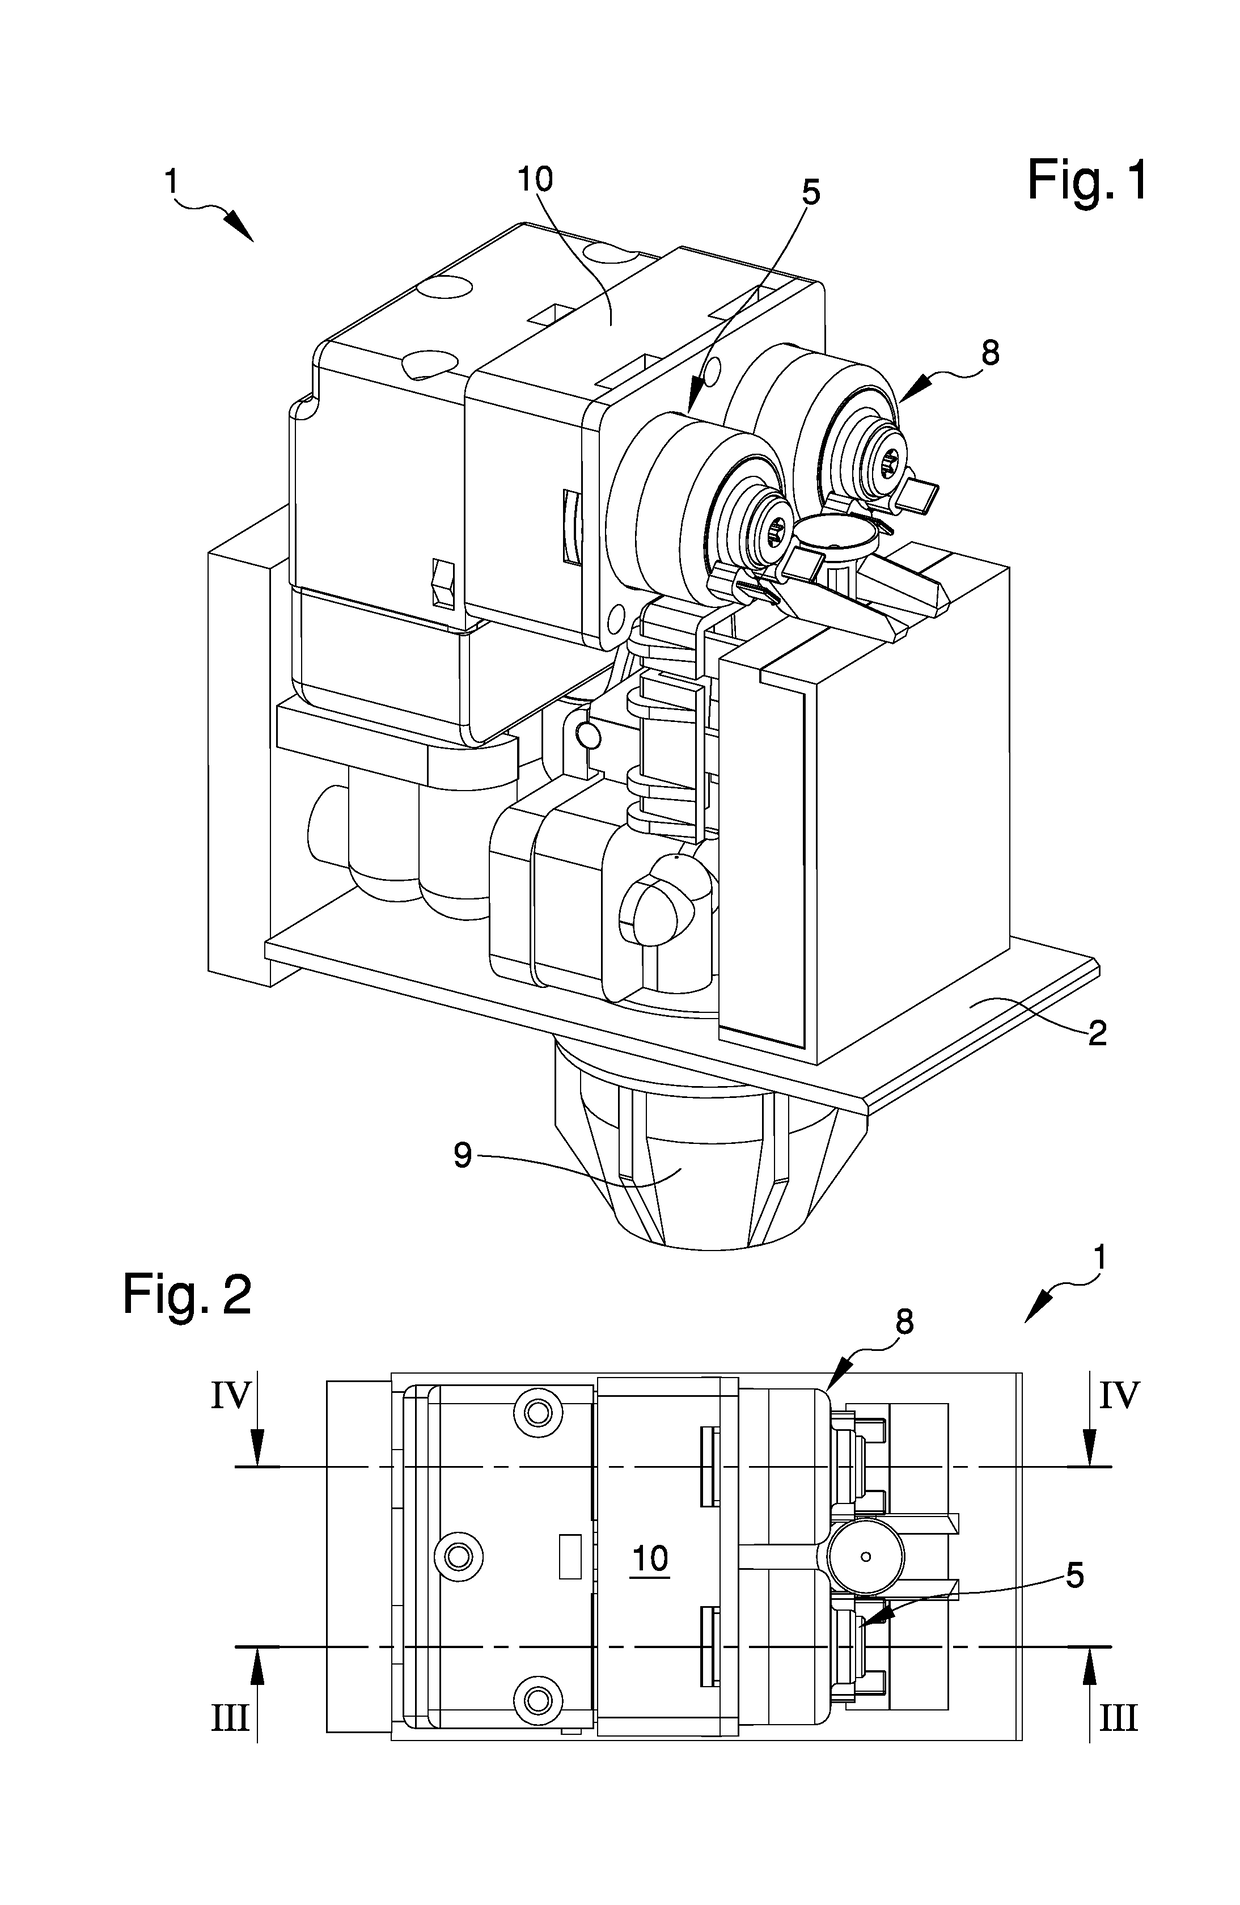 Device for the mixing of fluids